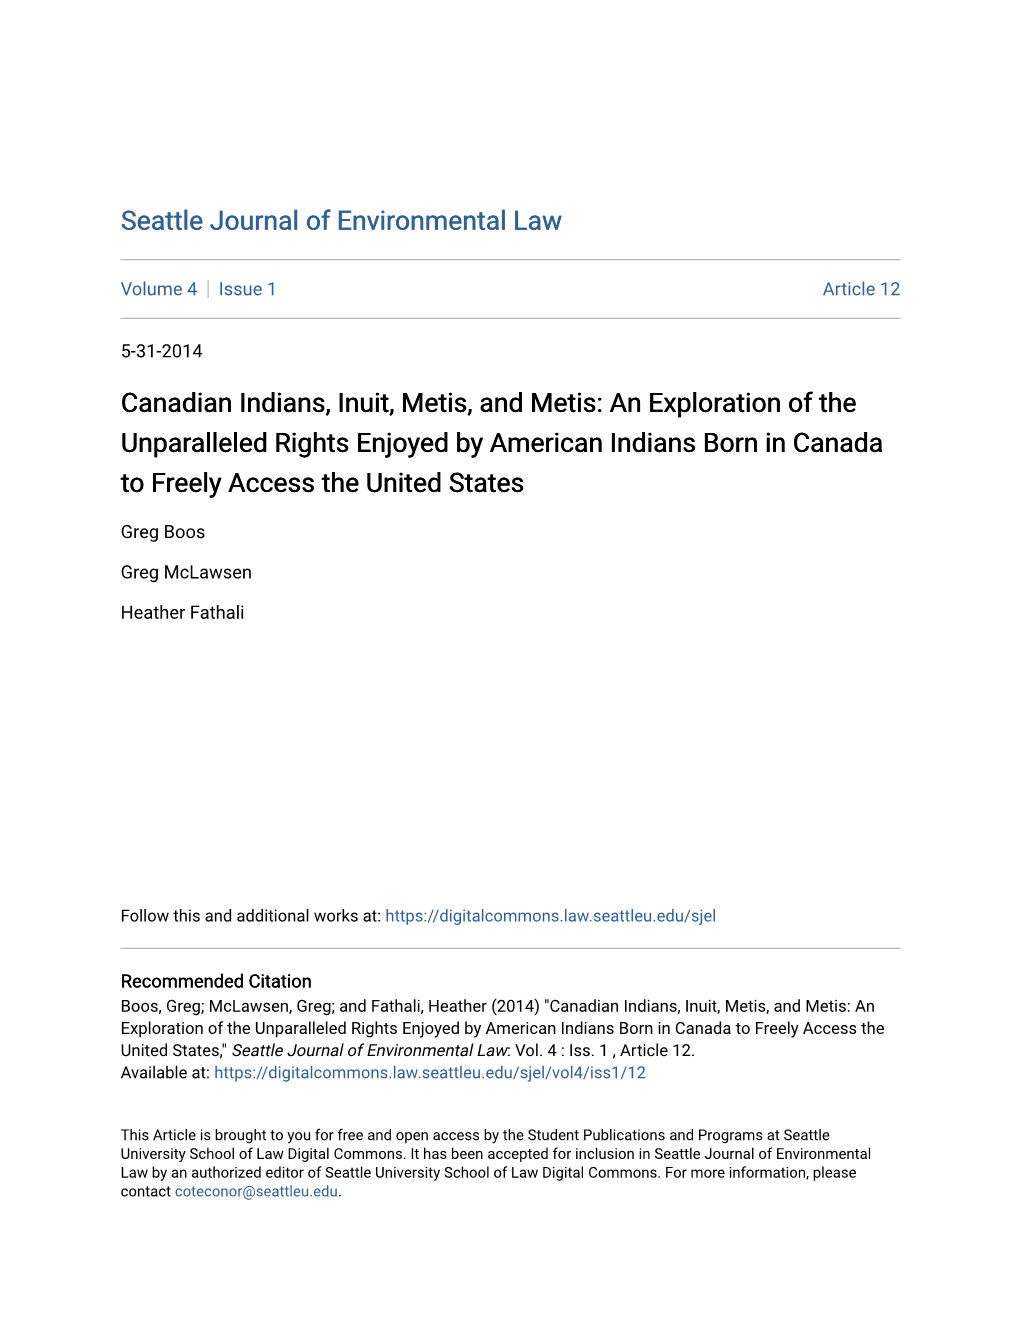 Canadian Indians, Inuit, Metis, and Metis: an Exploration of the Unparalleled Rights Enjoyed by American Indians Born in Canada to Freely Access the United States